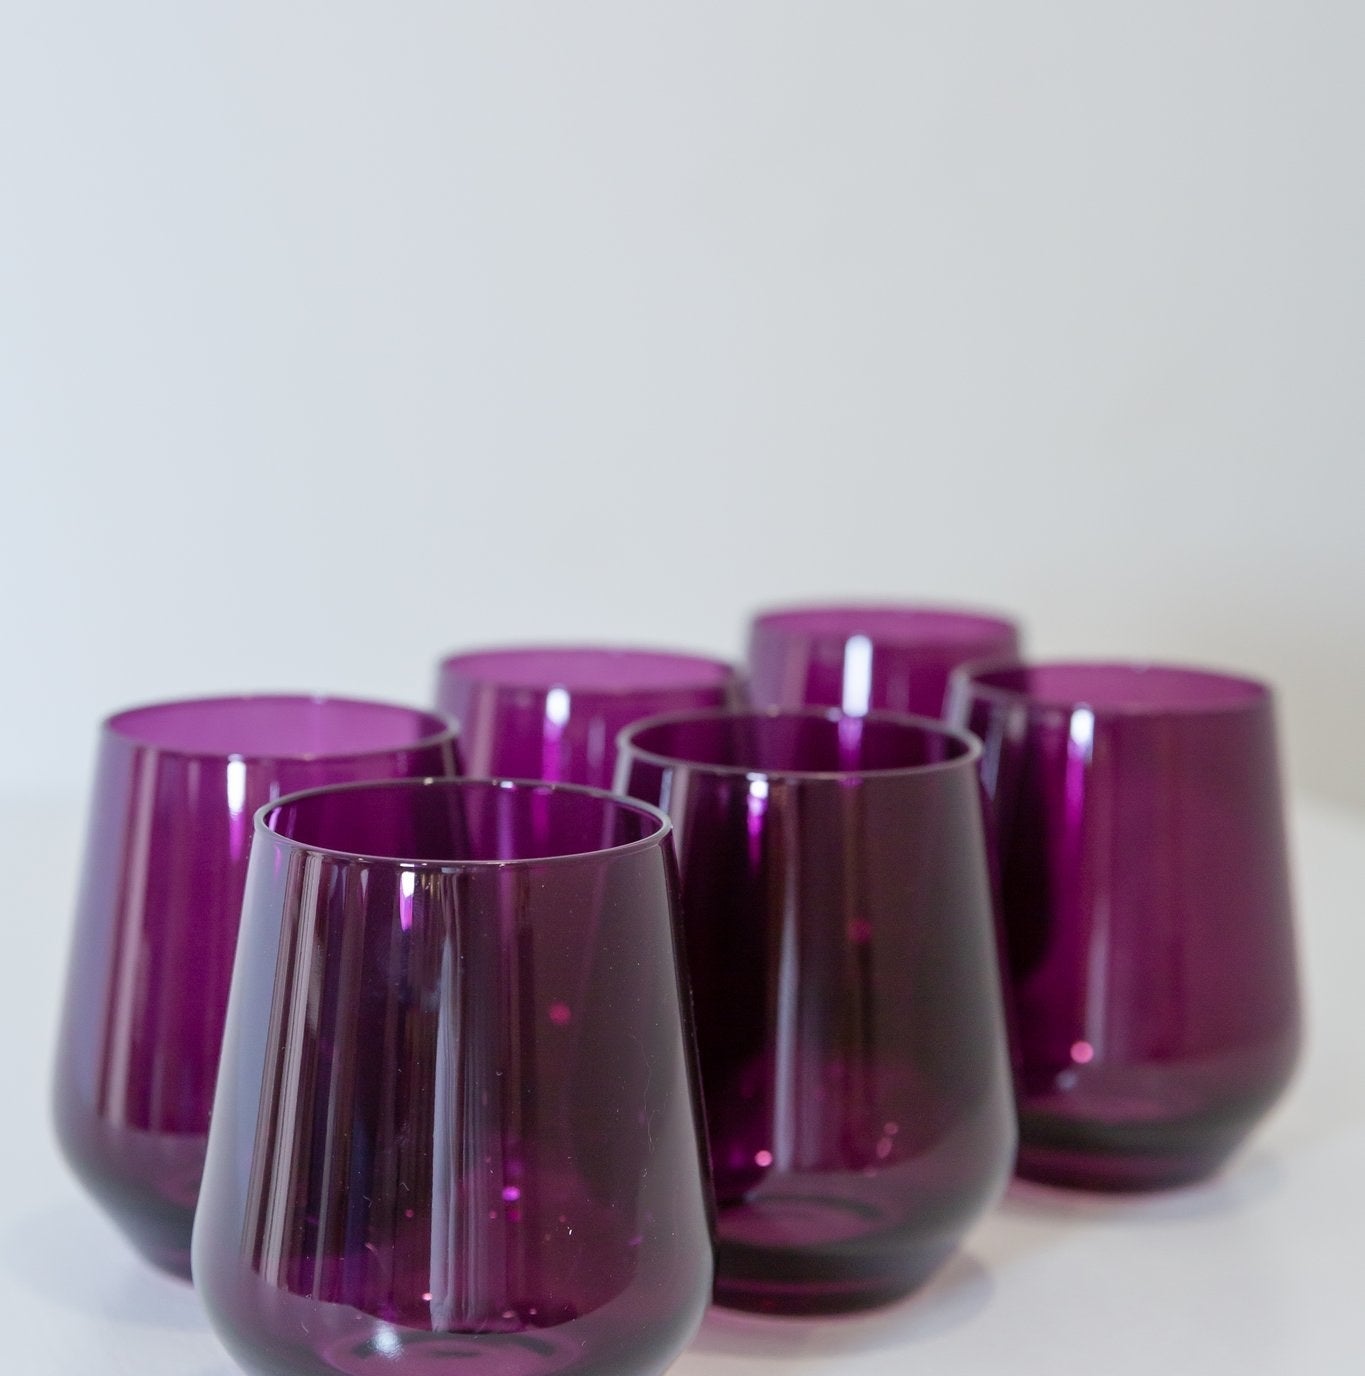 A set of six stemless wine glasses in a dark purple color